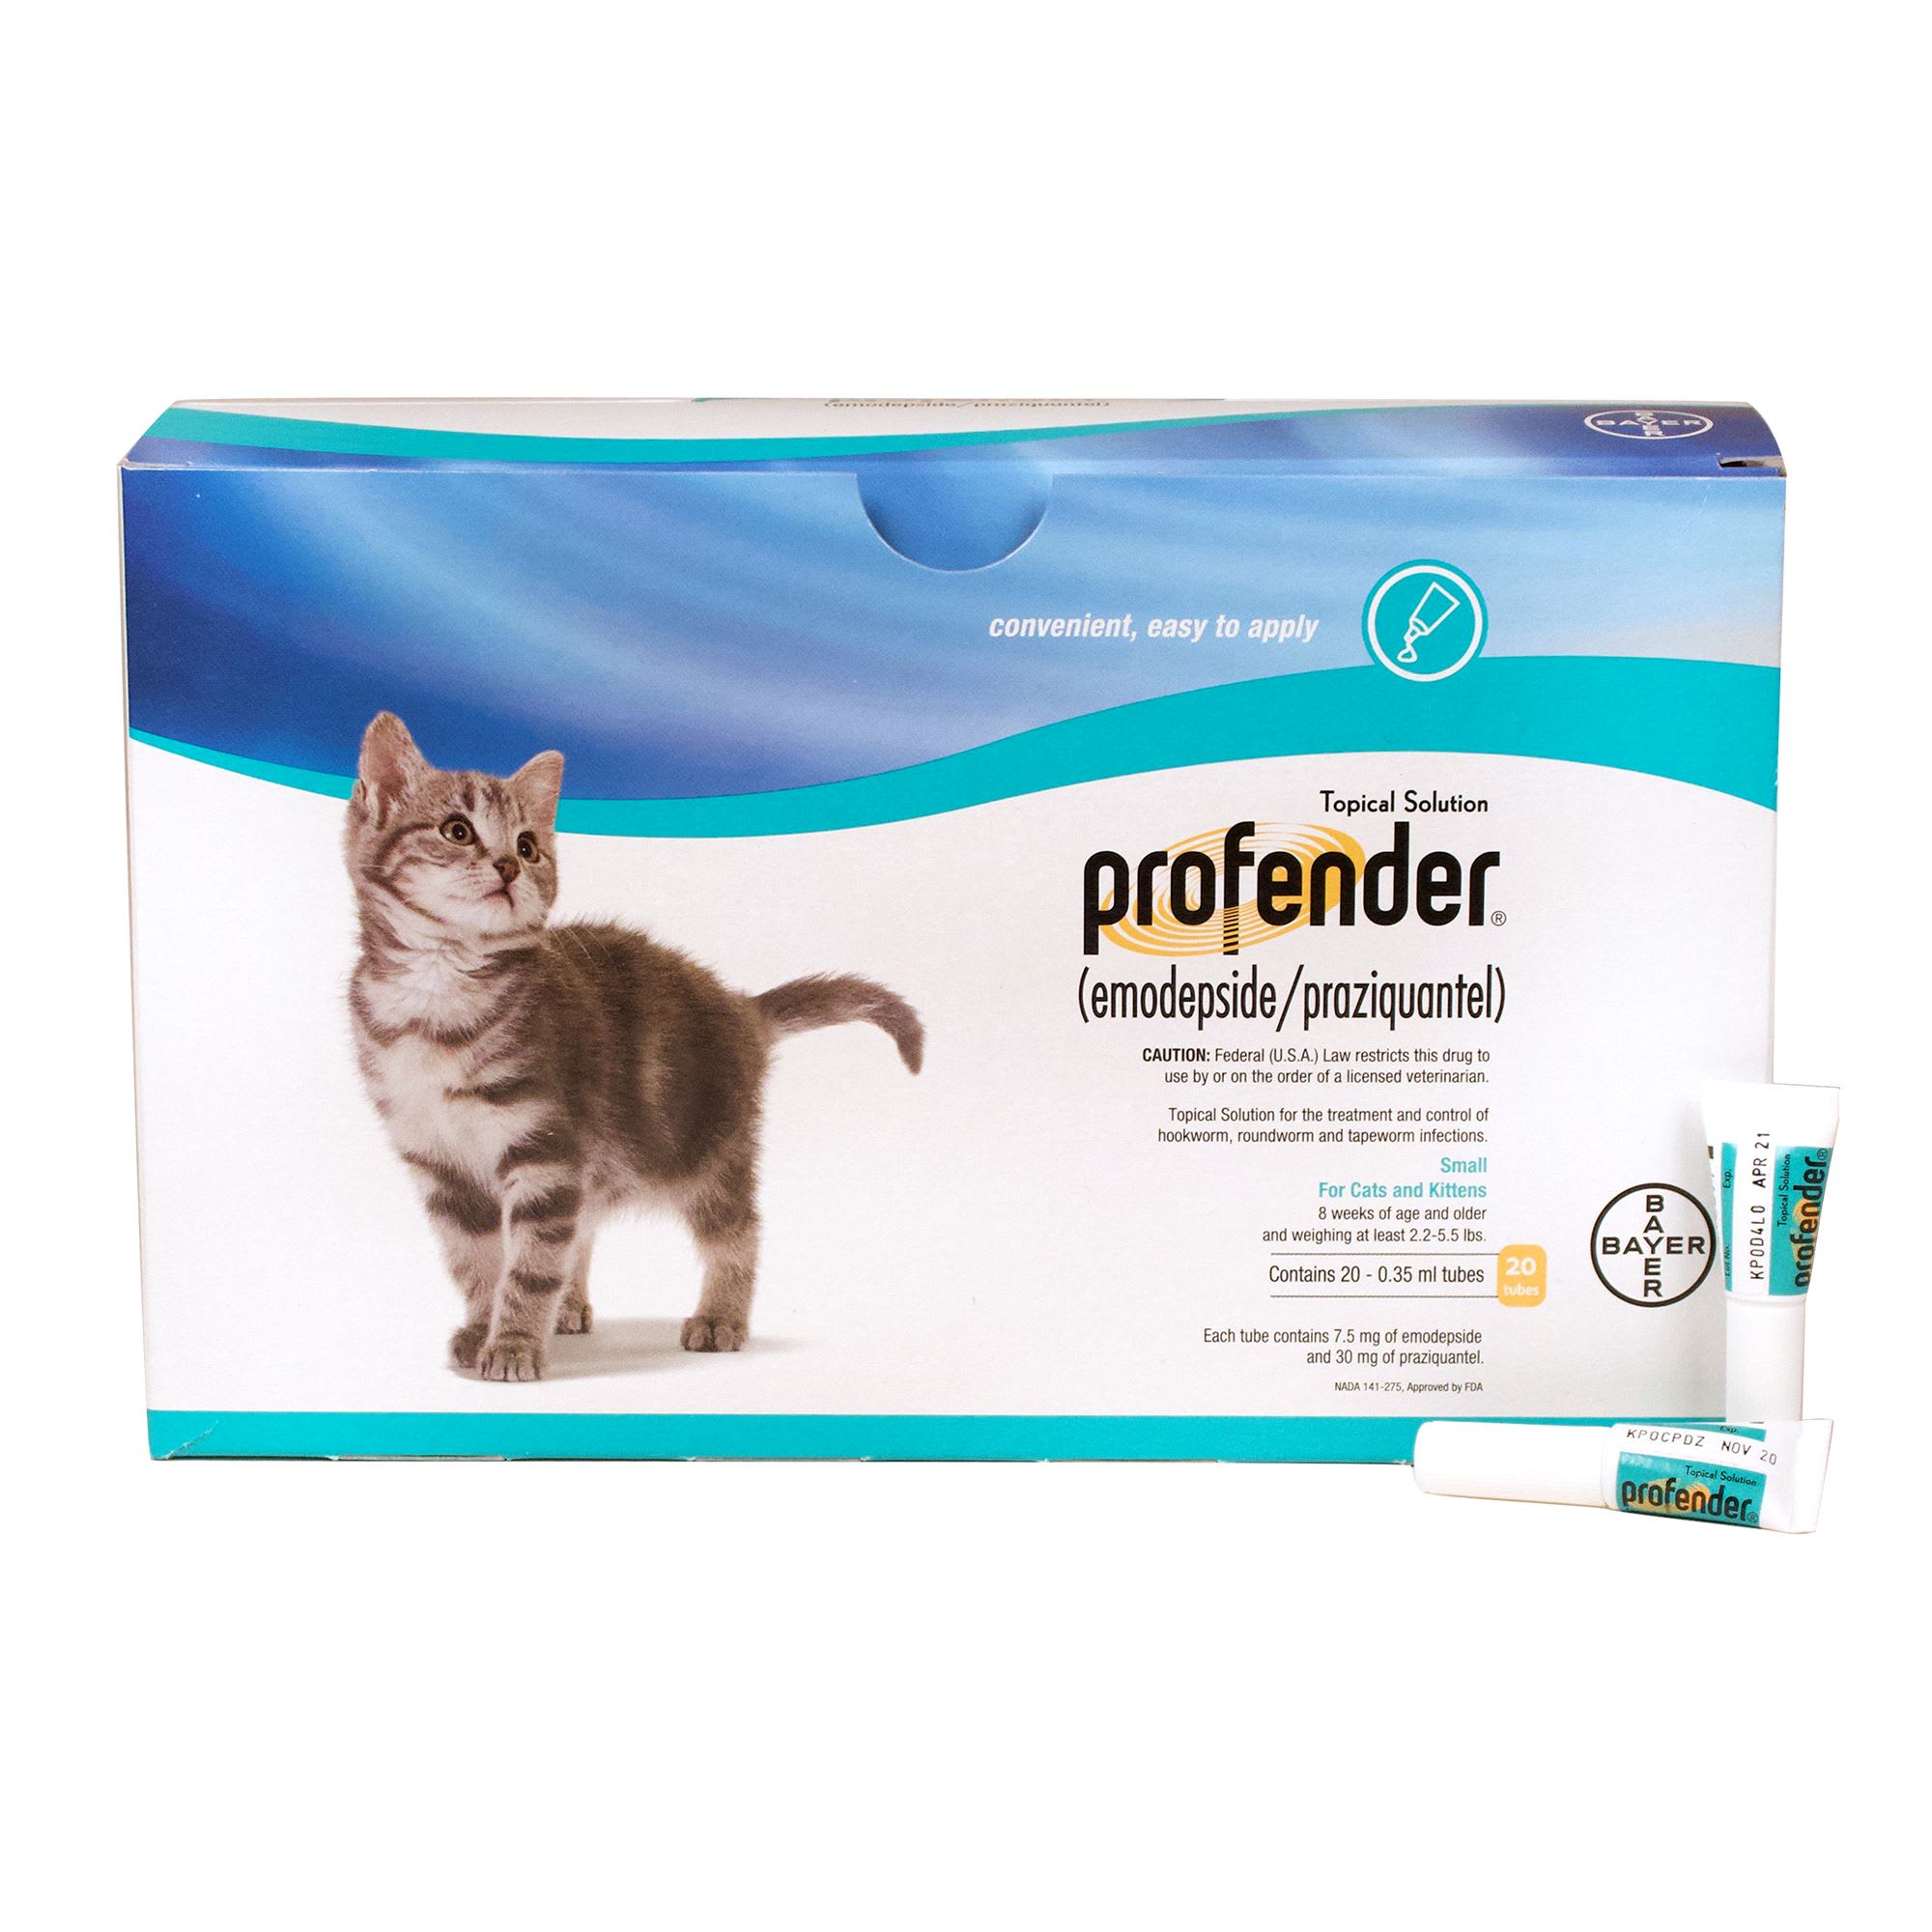 profender-for-cats-2-2-to-5-5-lbs-0-70-ml-single-dose-petco